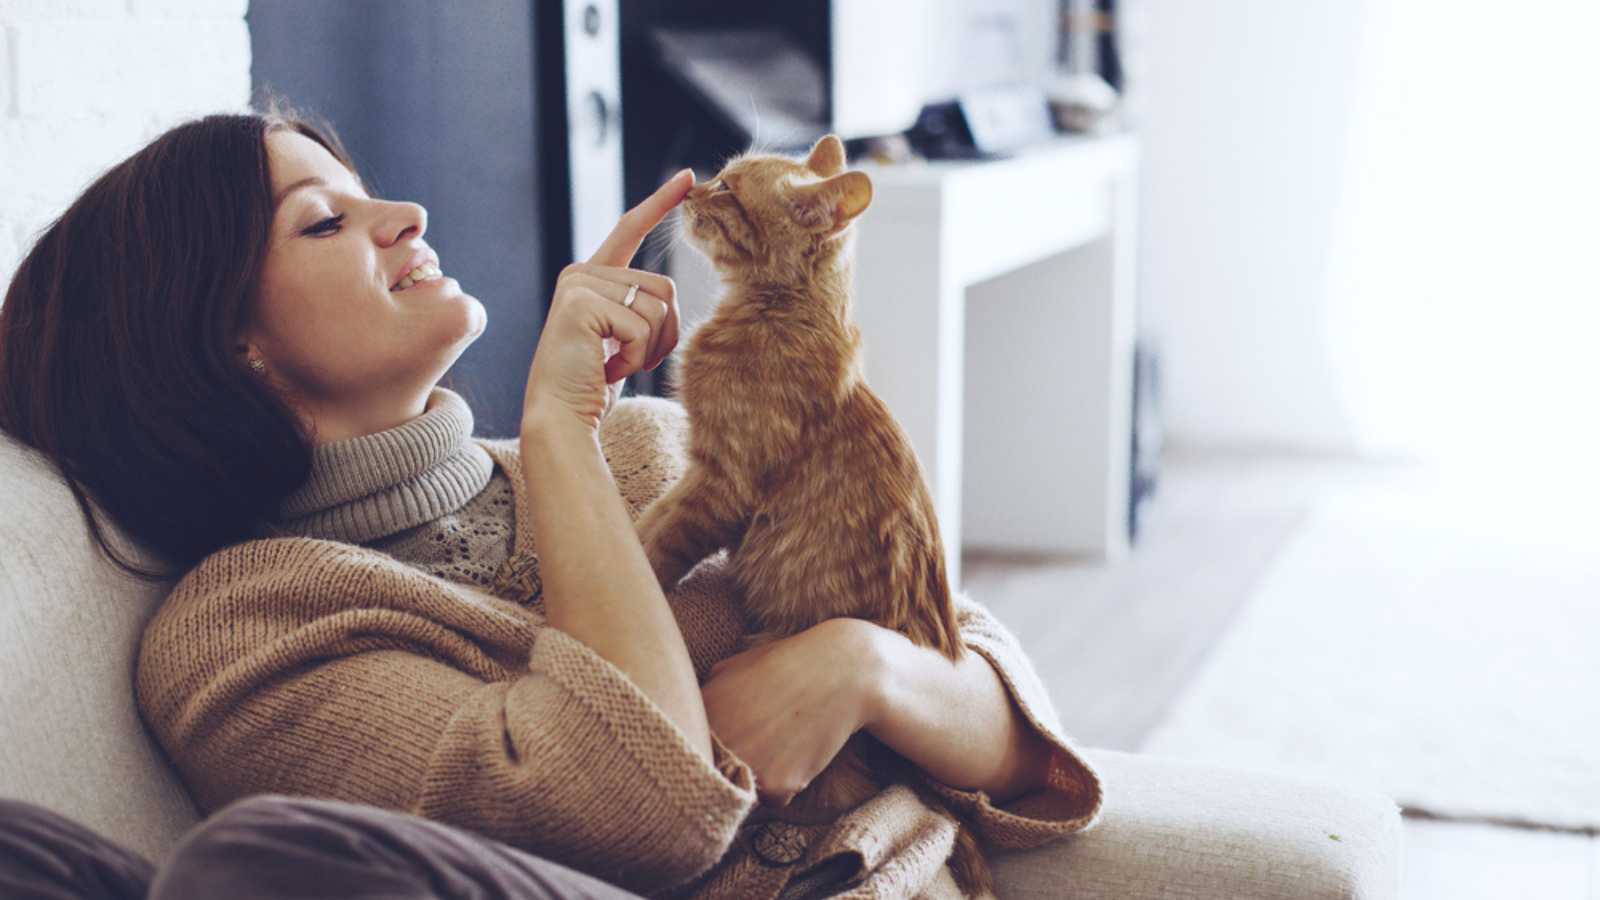 Woman playing with cat